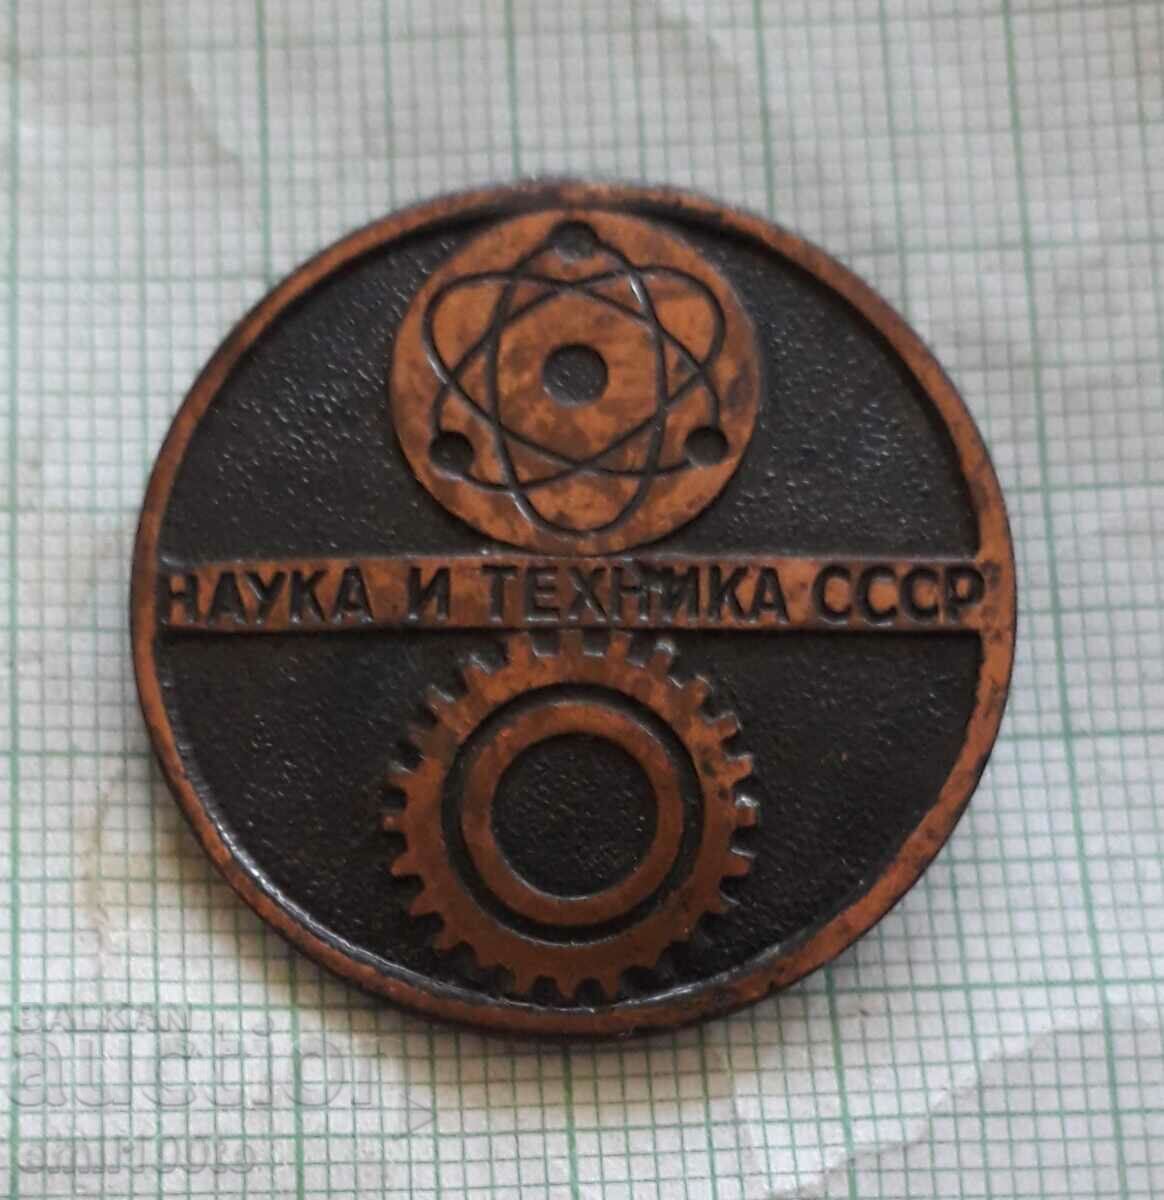 Badge - USSR Science and Technology